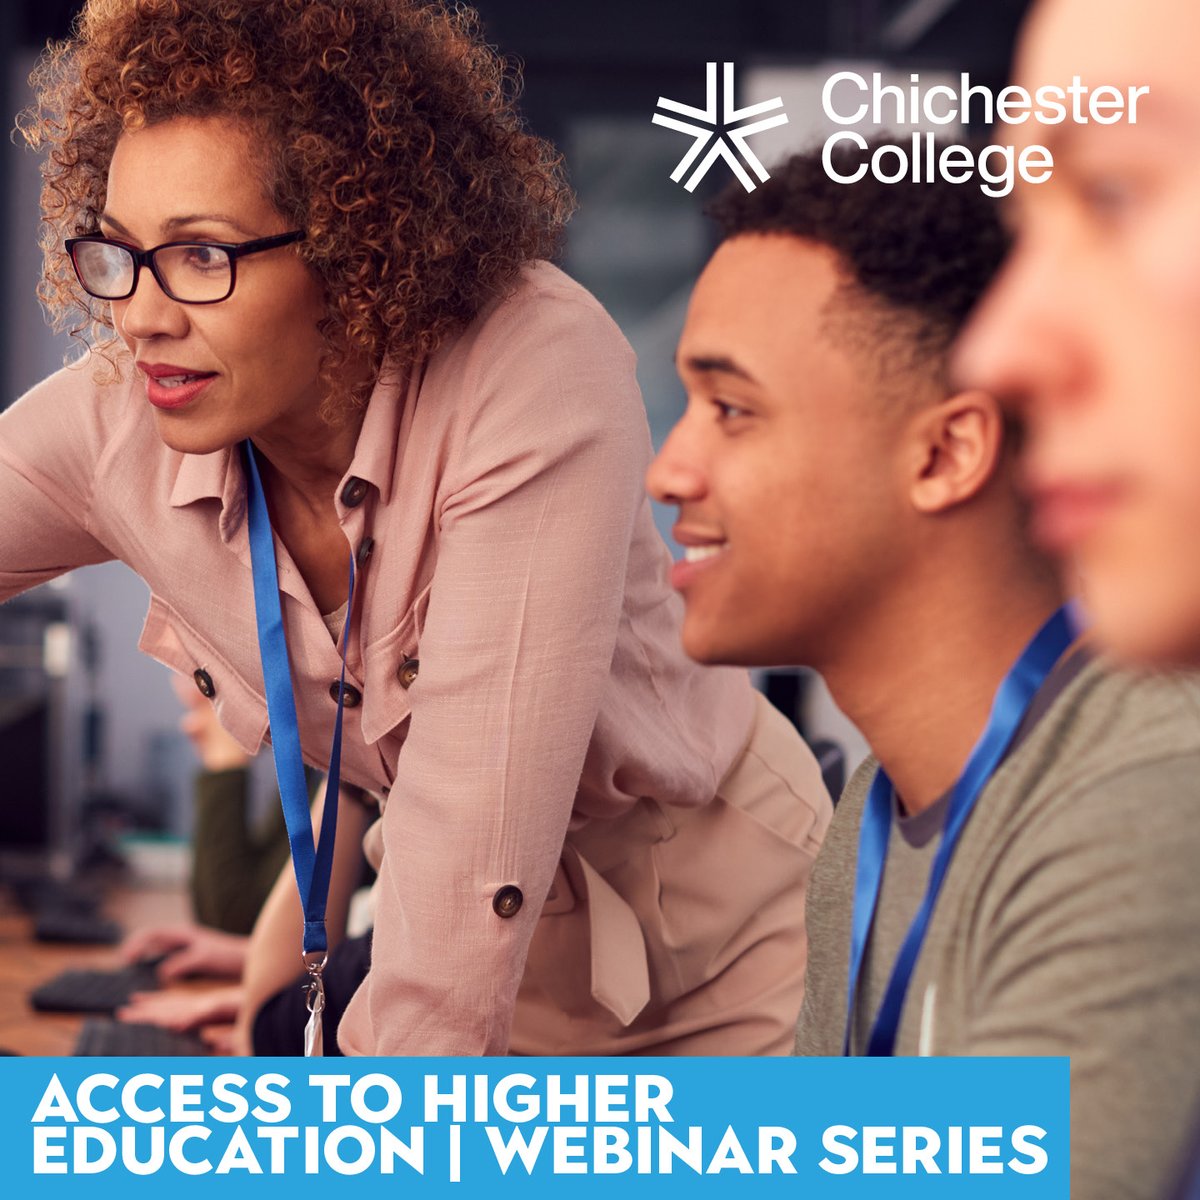 Discover how you can bridge the gap to university with an Access Diploma! Join one of our upcoming webinars to find out how we can support you into your dream career: orlo.uk/uS0Xa 

#AccessToHigherEducation #WebinarSeries #LifeLongLearning #MadeAtChiCollege